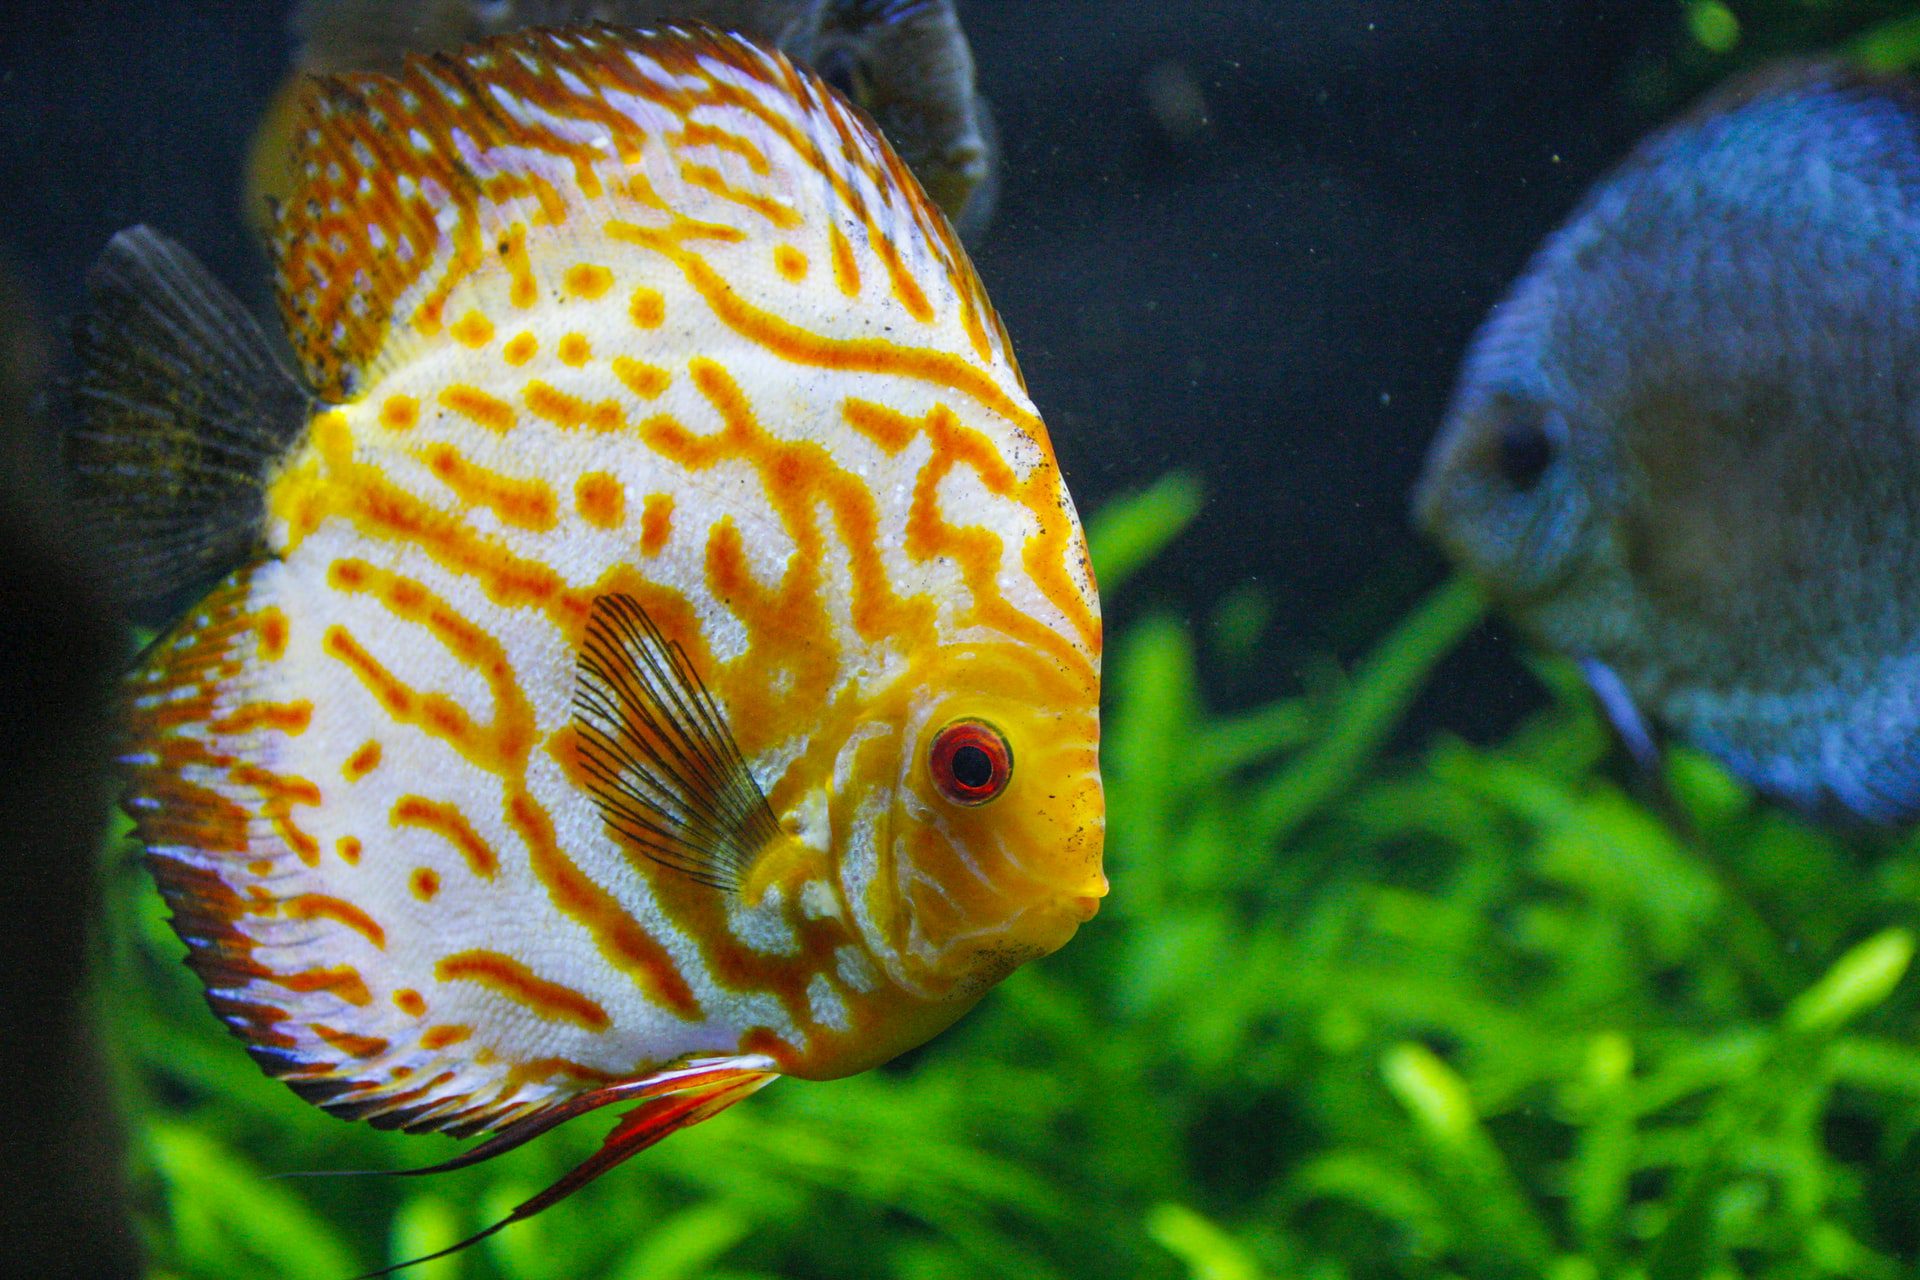 How Hard is It To Take Care of Discus Fish?